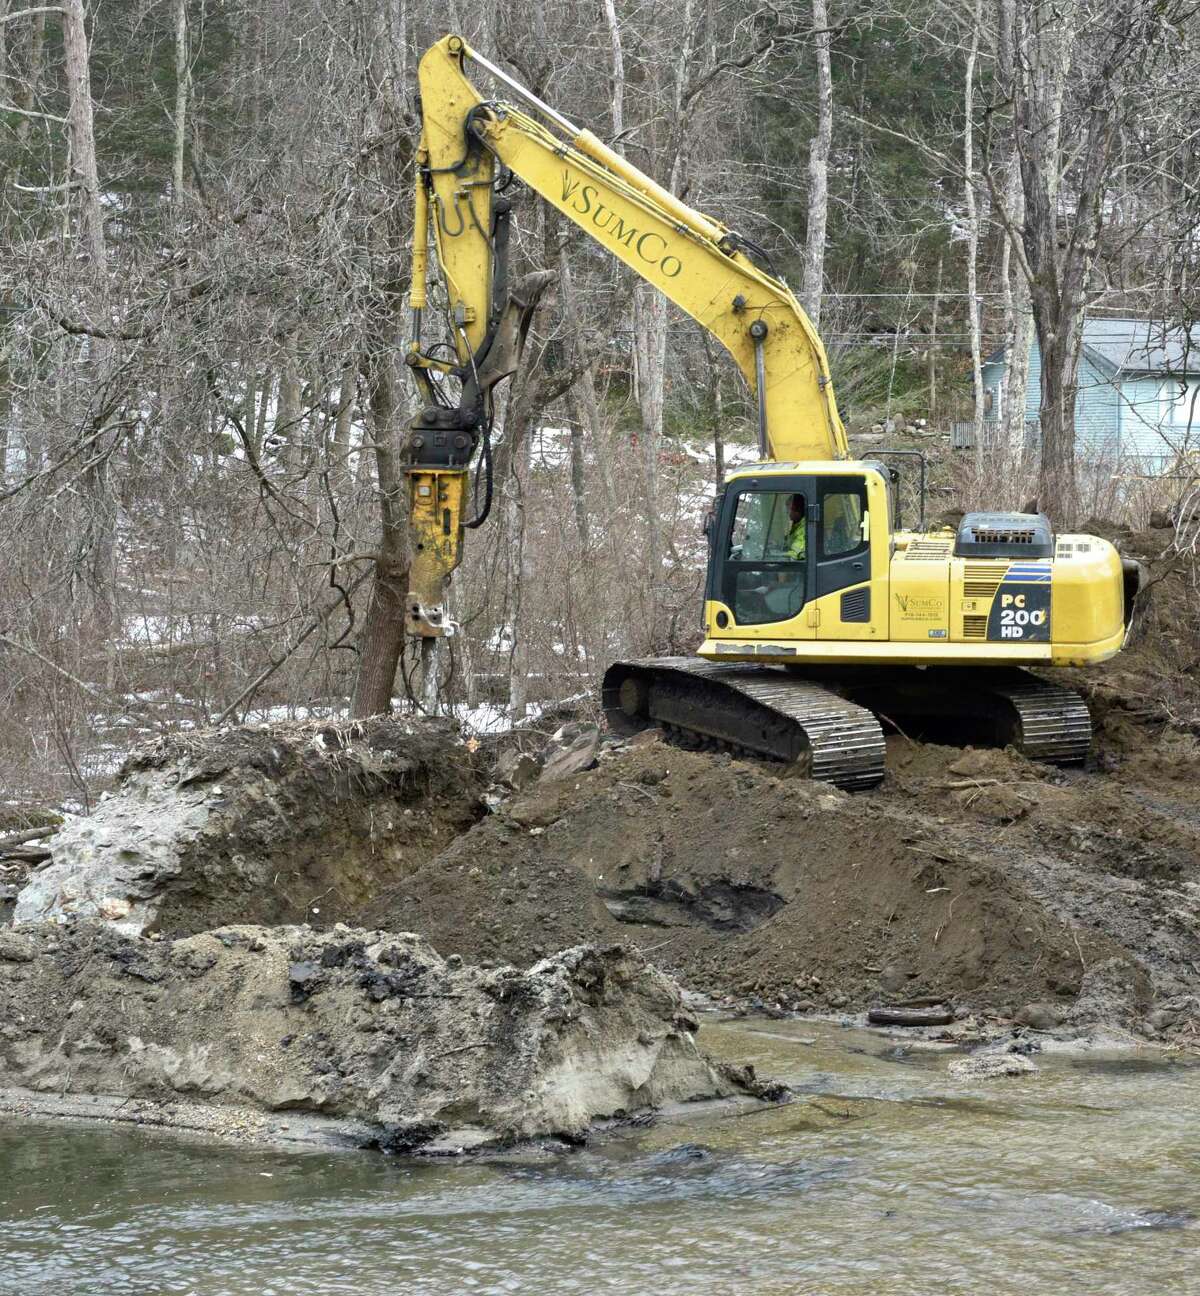 The Old Papermill Pond Dam was the first to be removed by the Nature Conservancy in 2019. Now, New Milford has to decide whether to repair or demolish one of its reservoir dams.